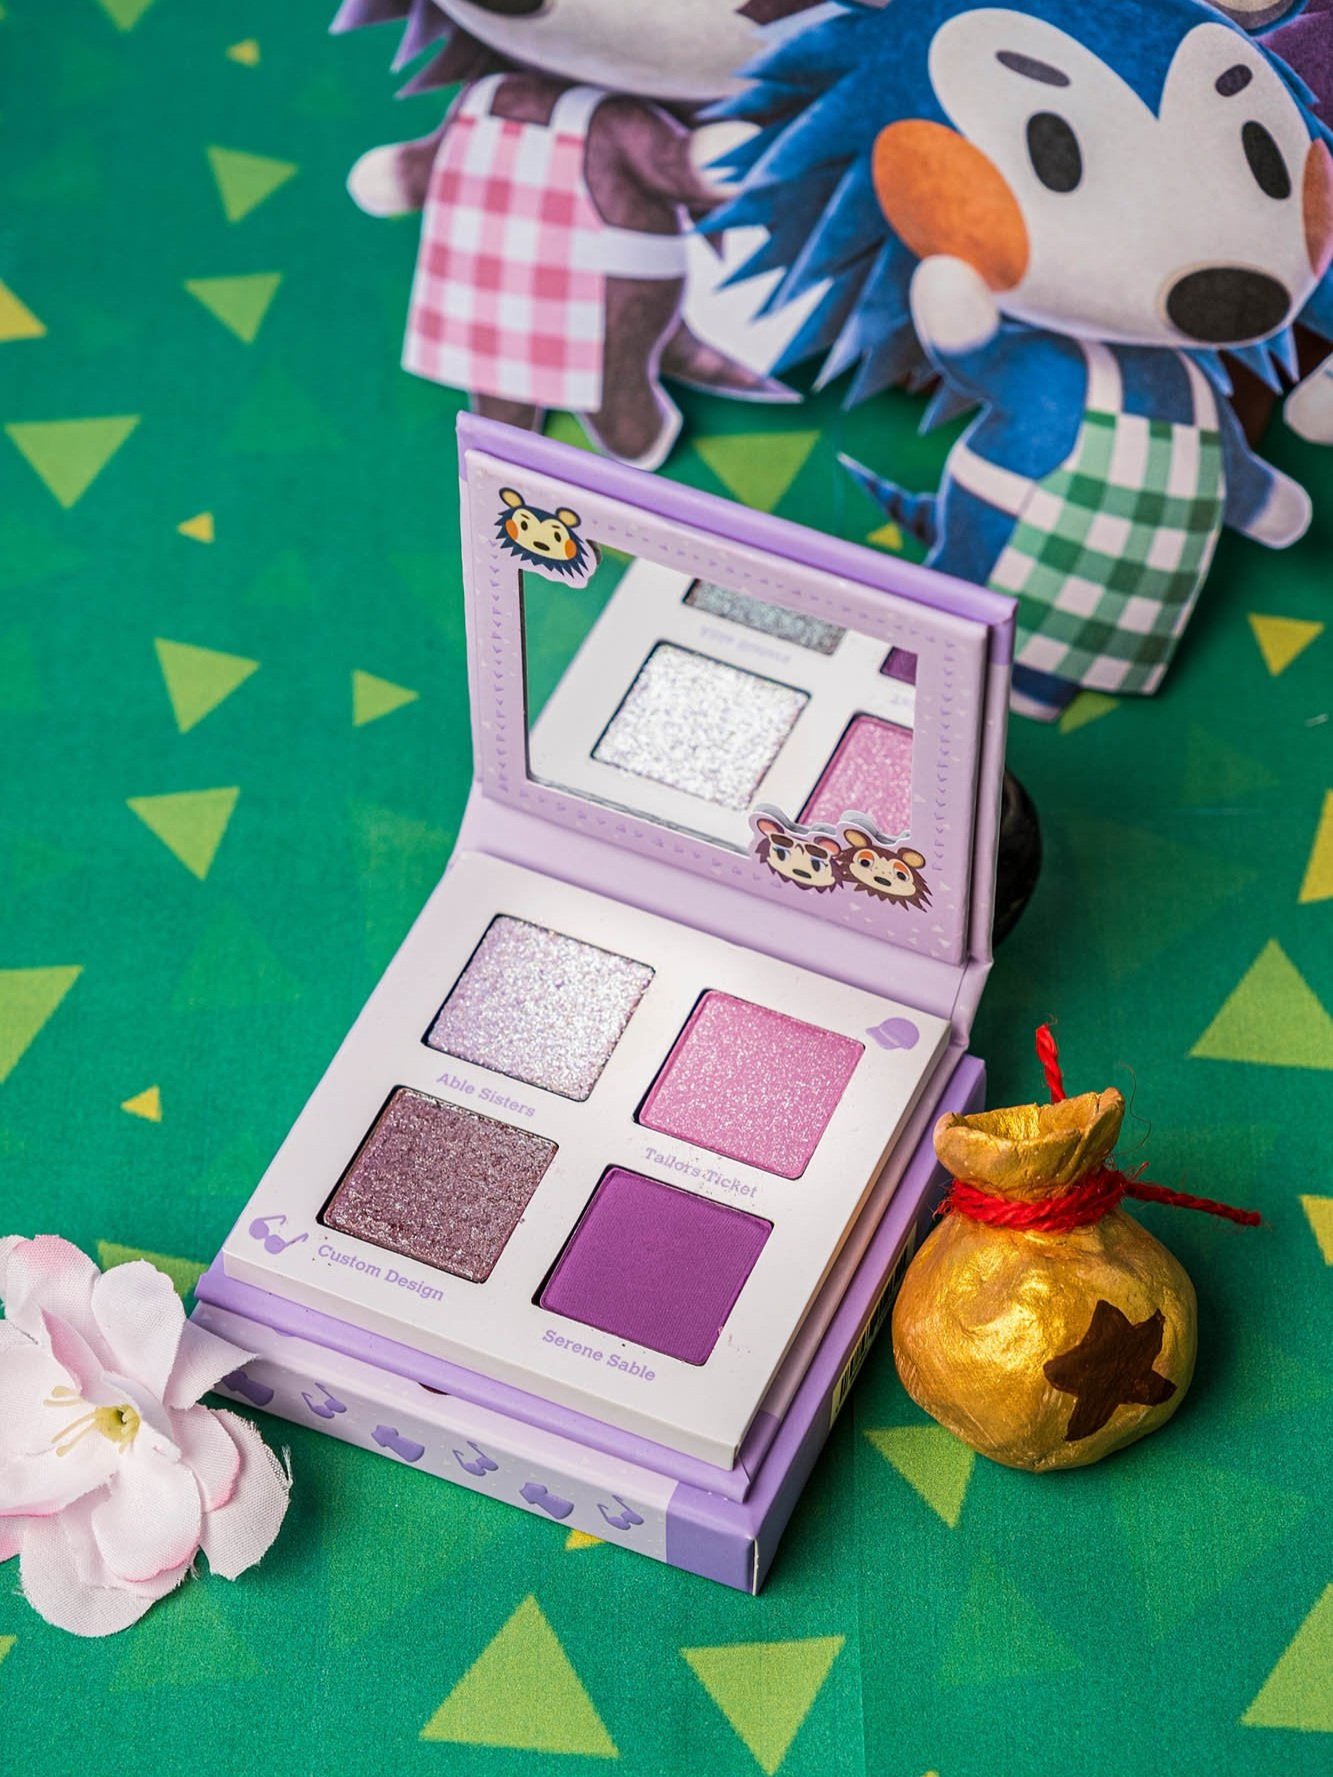 Professional product photography of Animal crossing makeup palette on green background taken by Sharma Shari Photography